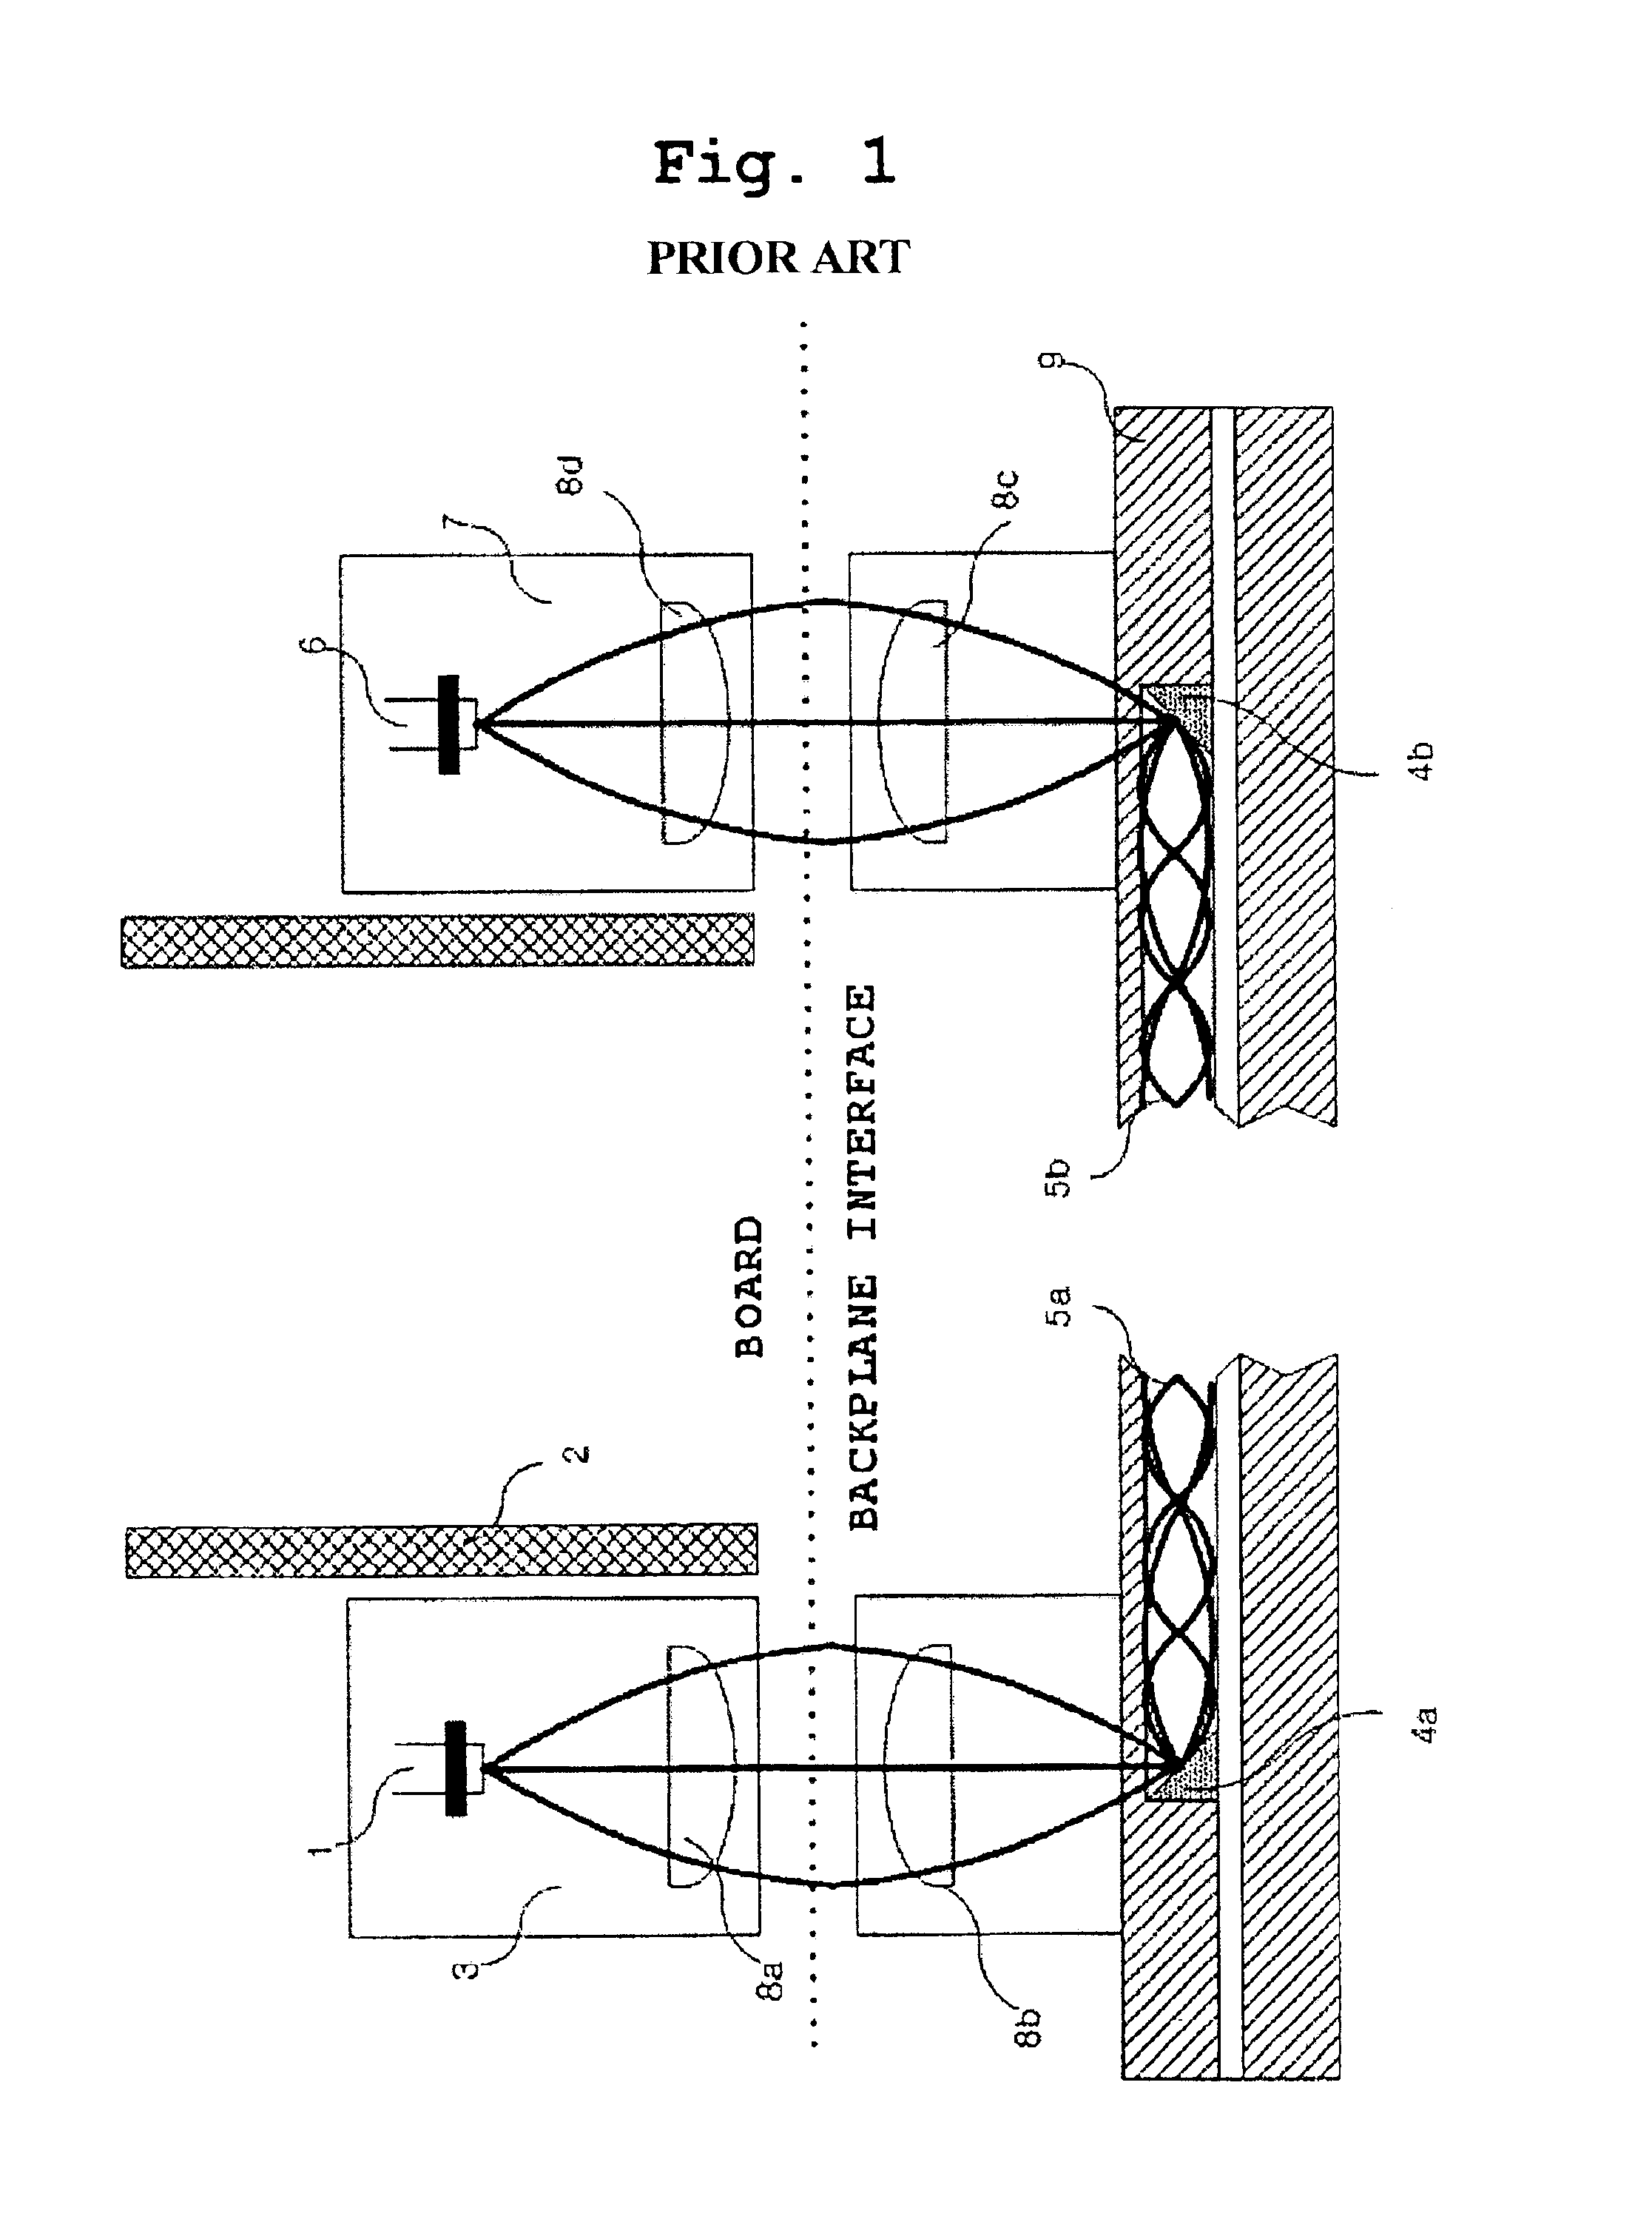 Multi-layer printed circuit board and the method for coupling optical signals between layers of multi-layer printed circuit board